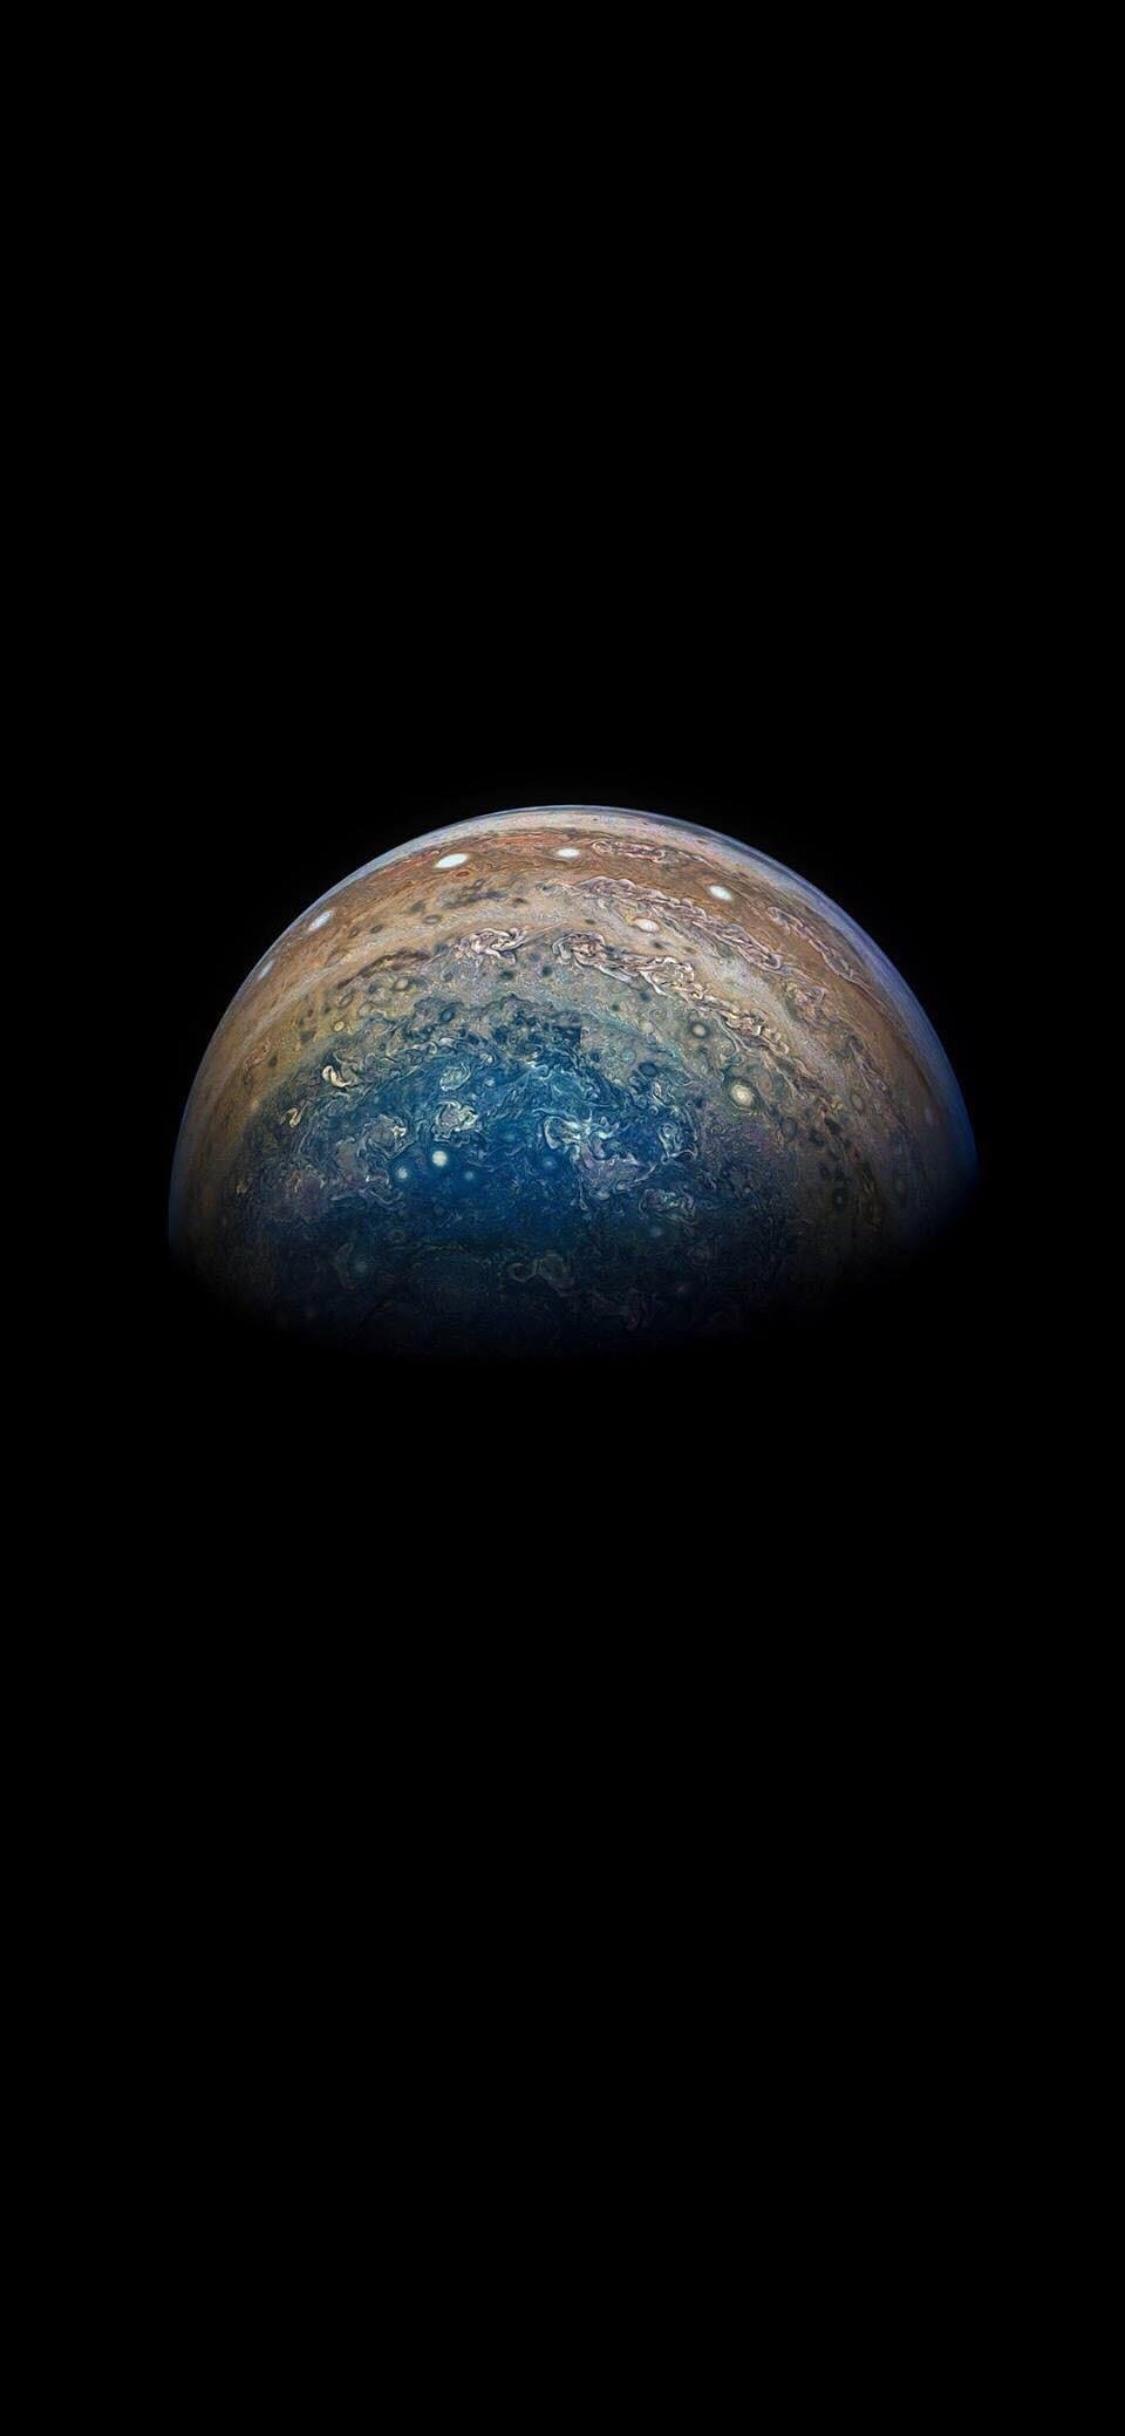 Jupiter resized for iPhone X : iphonexwallpapers